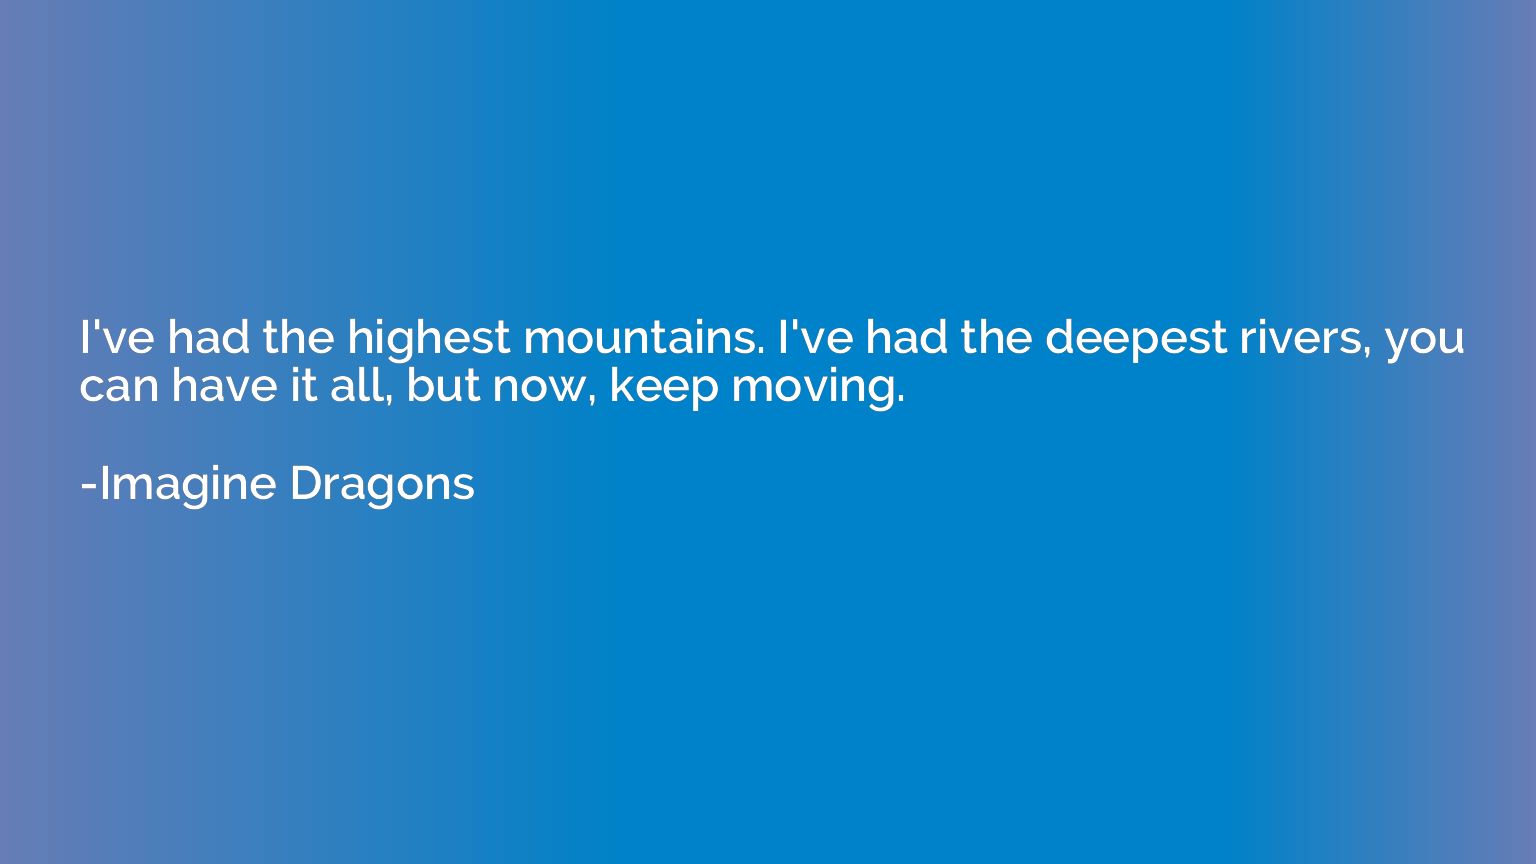 I've had the highest mountains. I've had the deepest rivers,